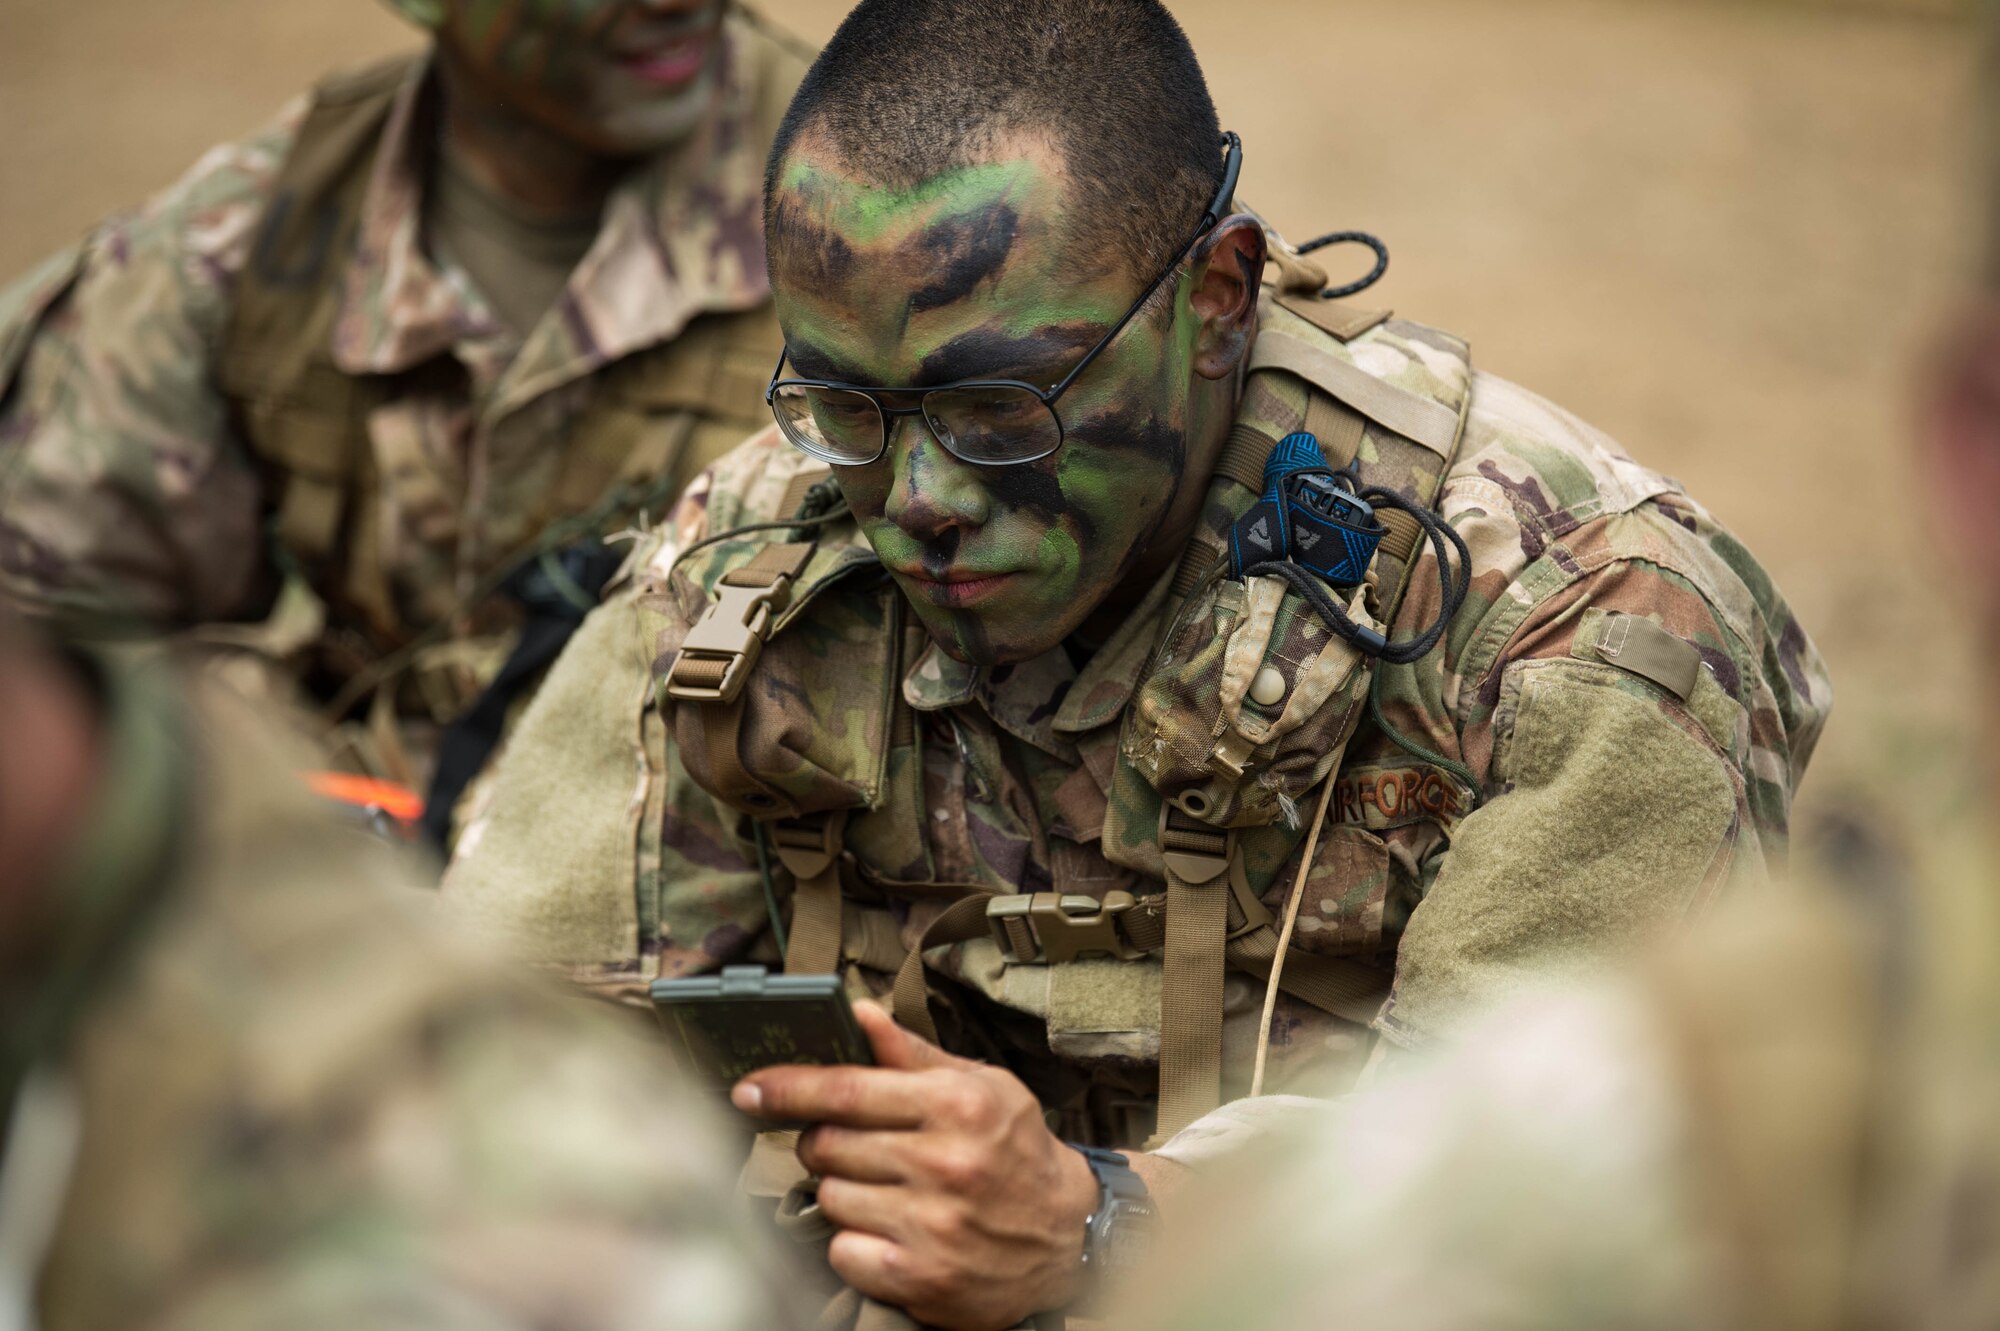 Staff Sgt. Jose Obregon, Ranger Assessment Course student, applies face camouflage before going into the field near Schofield Barracks, Oahu, Hawaii, May 23, 2019.  The Airmen who pass the Ranger Assessment Course gain more than a ticket into Ranger School and knowledge on Army tactics – they learn to lead. (U.S. Air Force photo by Staff Sgt. Hailey Haux)